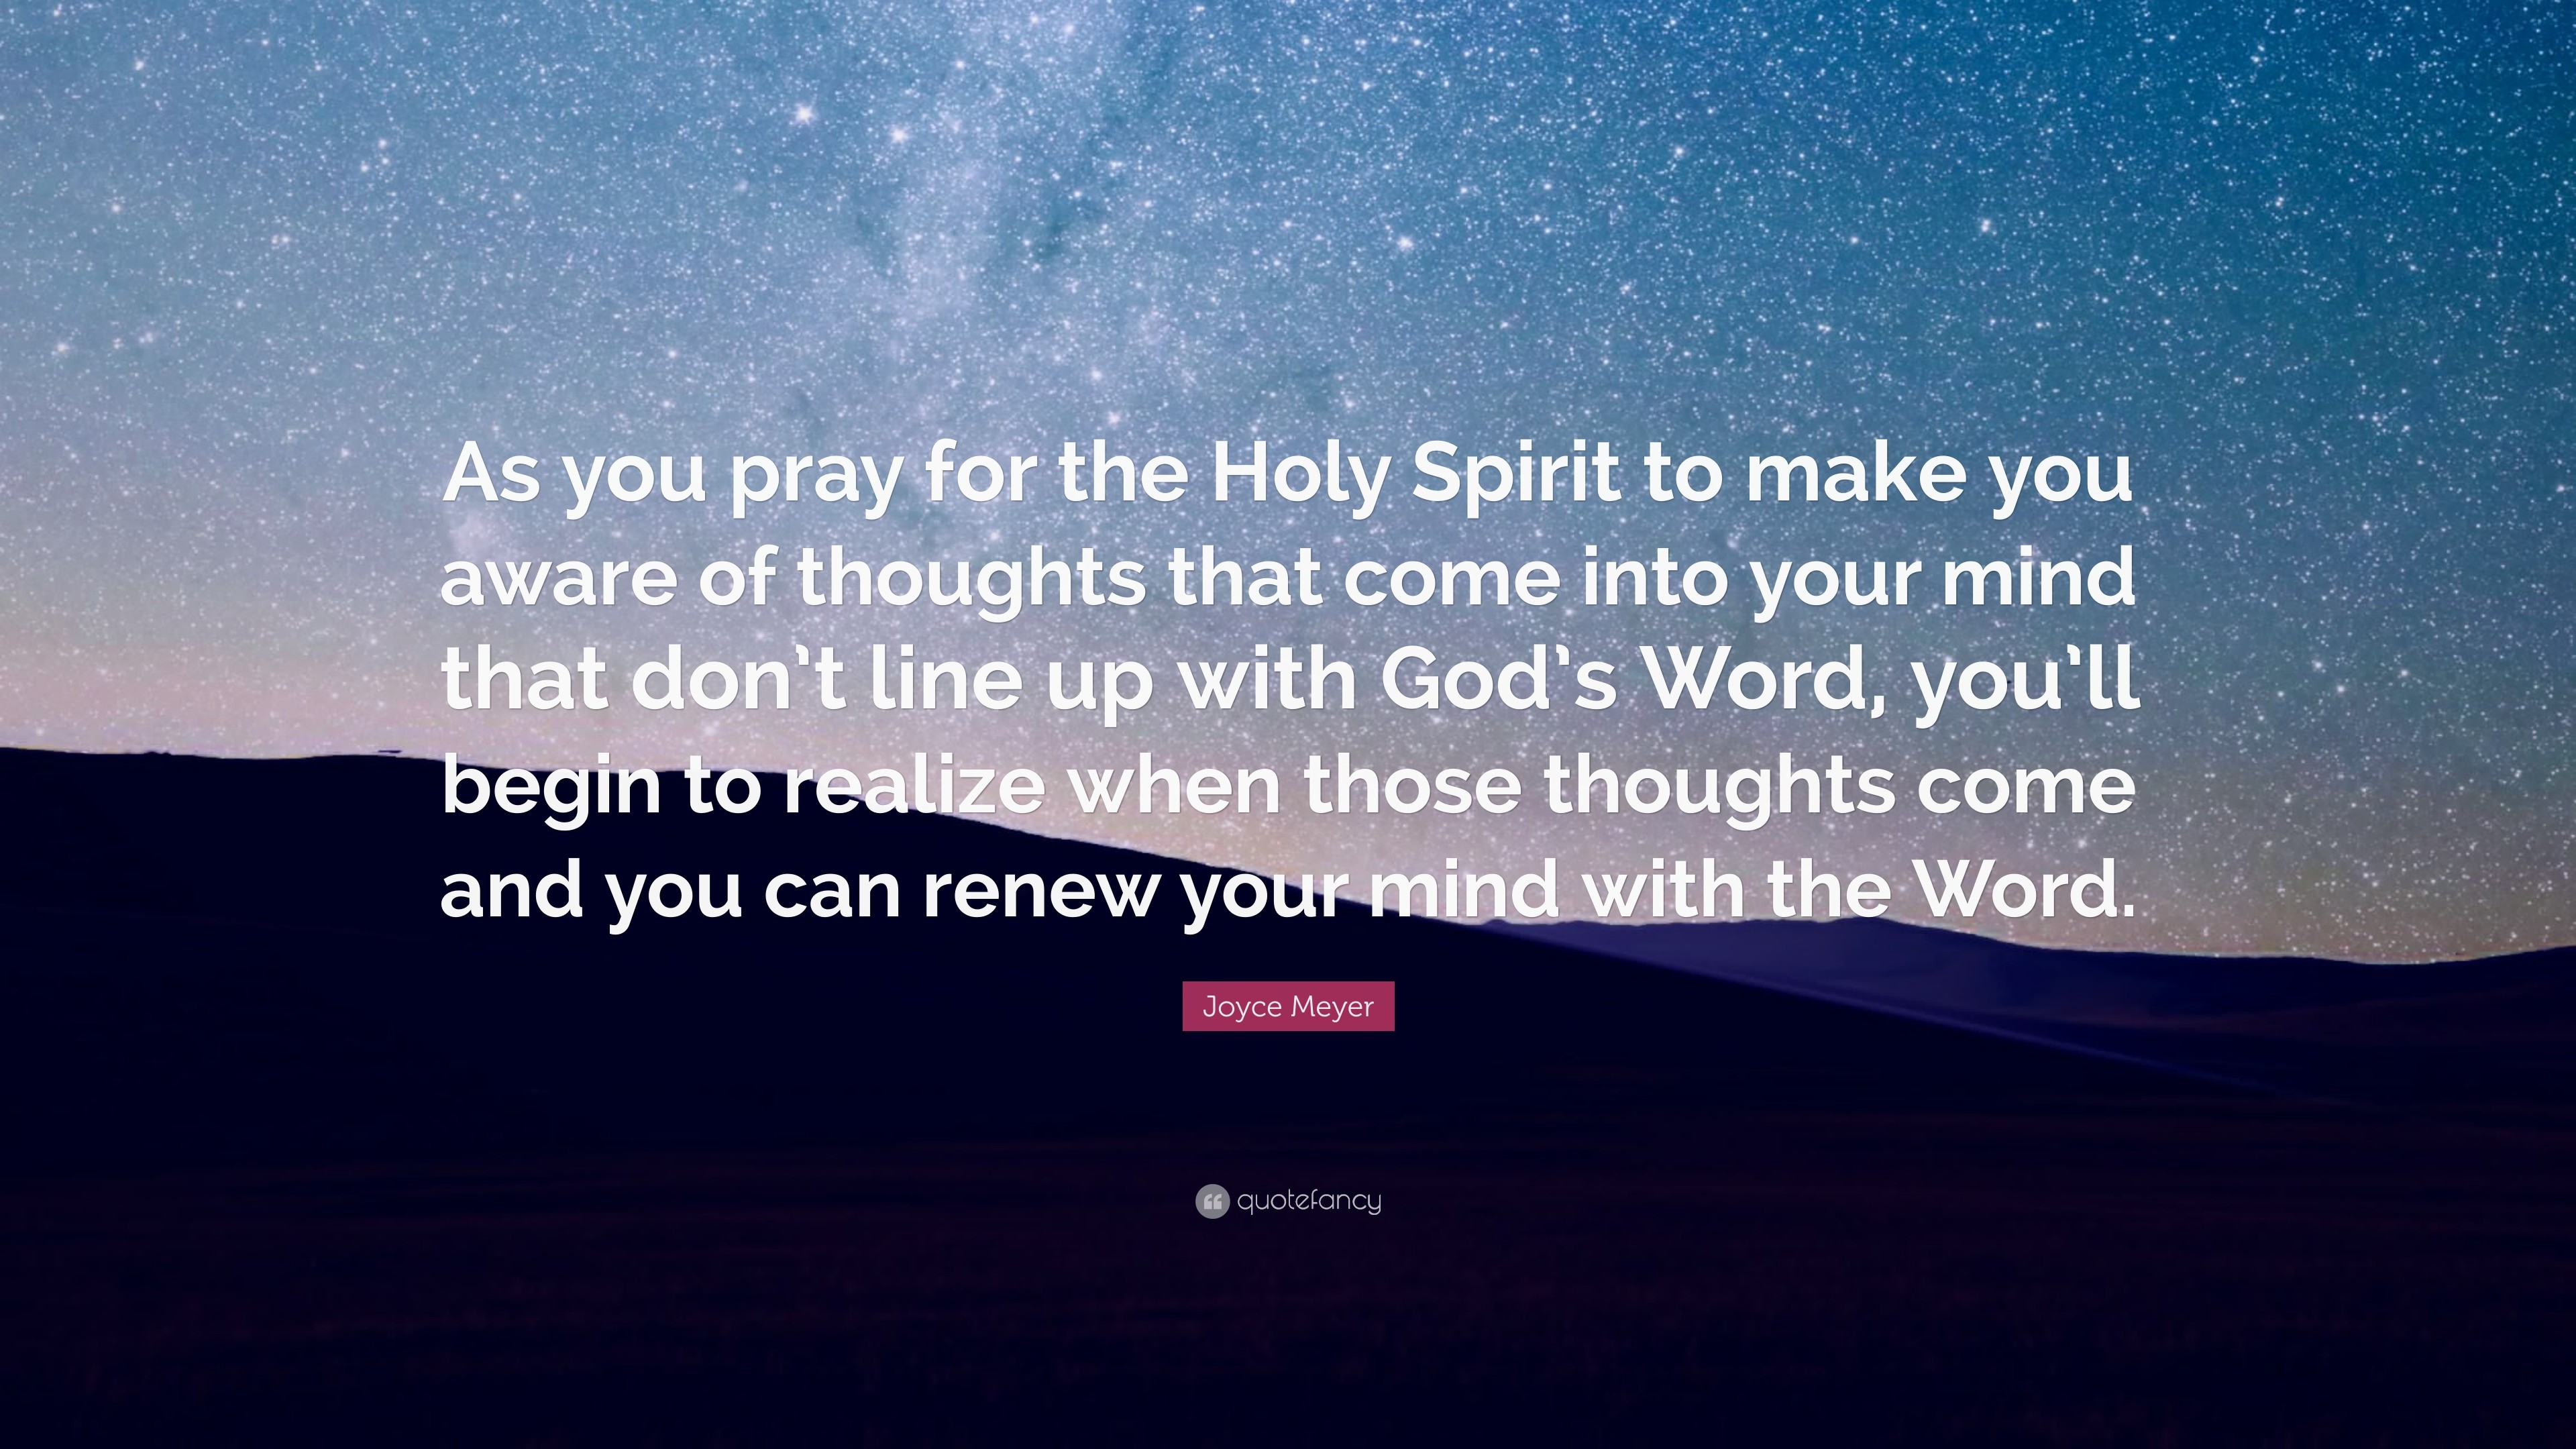 3840x2160 Joyce Meyer Quote: “As you pray for the Holy Spirit to make you aware